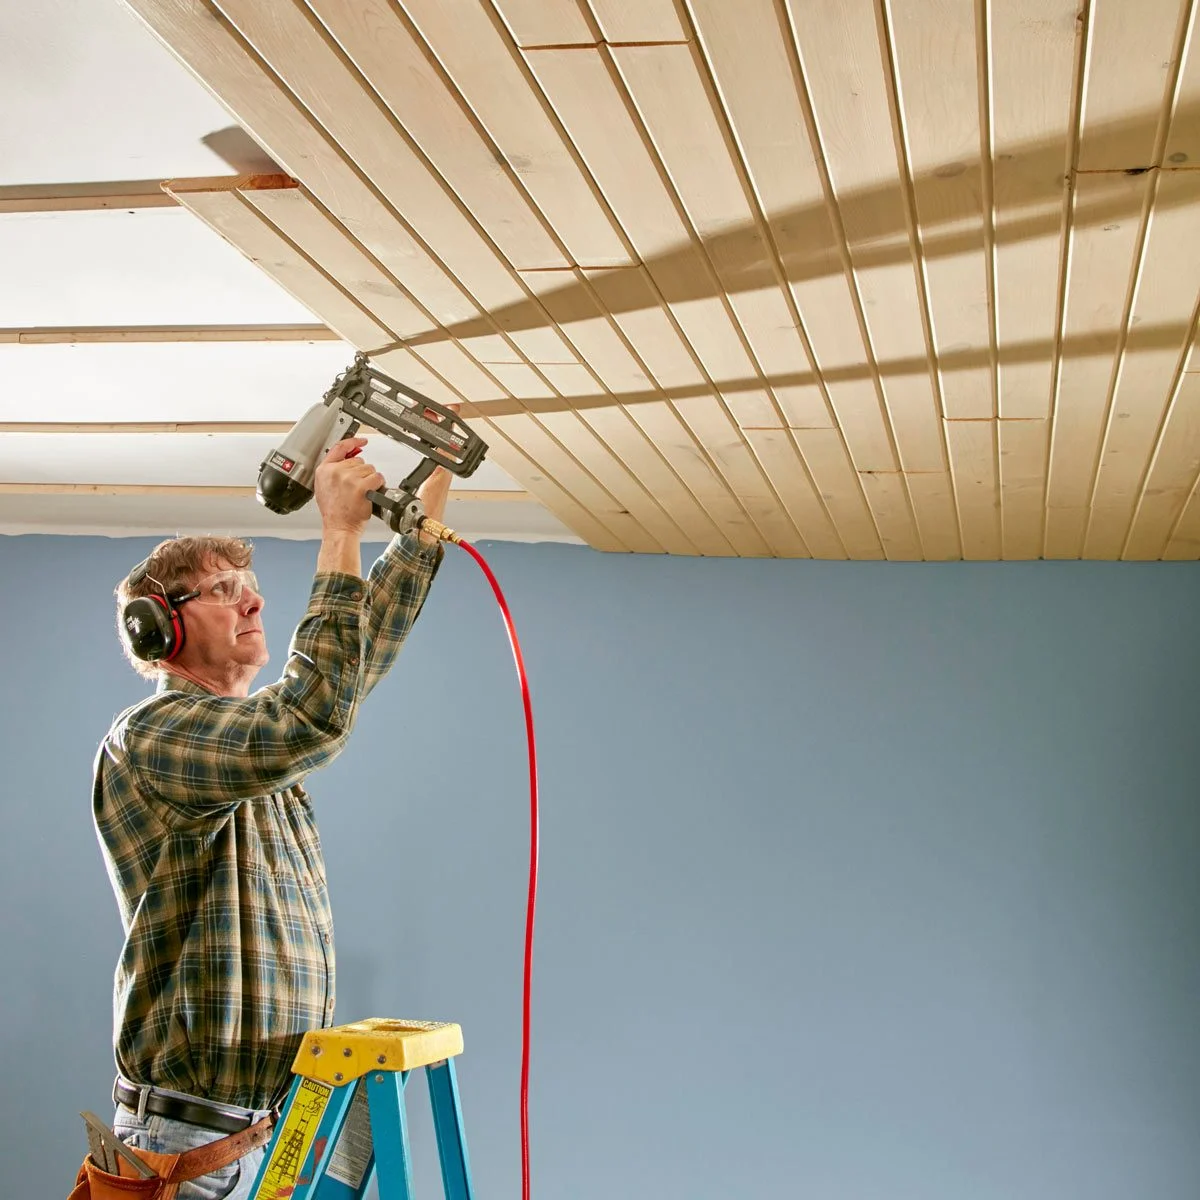 A man is installing tongue and groove on a ceiling in a room.